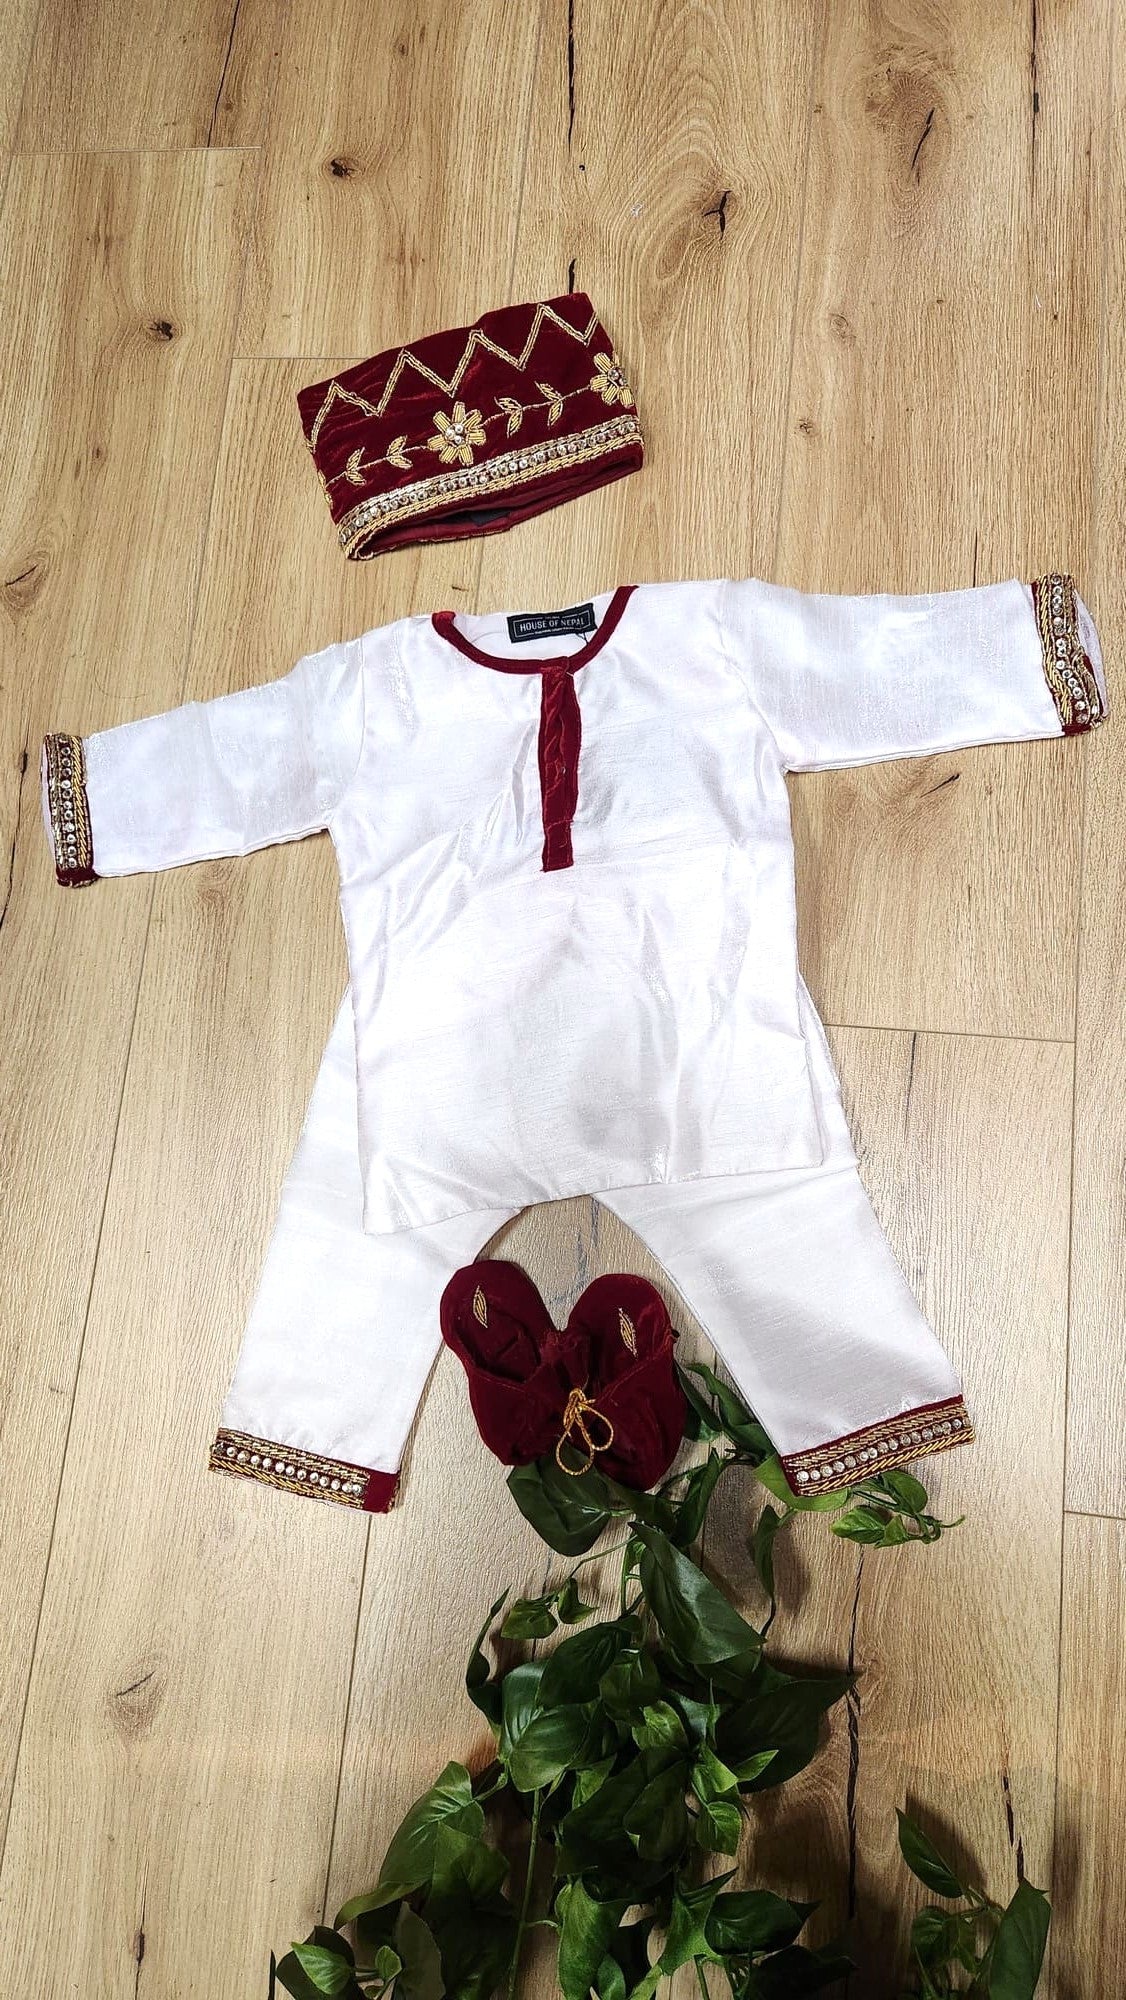 Boys Hand Embroidered Pasni Dress Set in Maroon